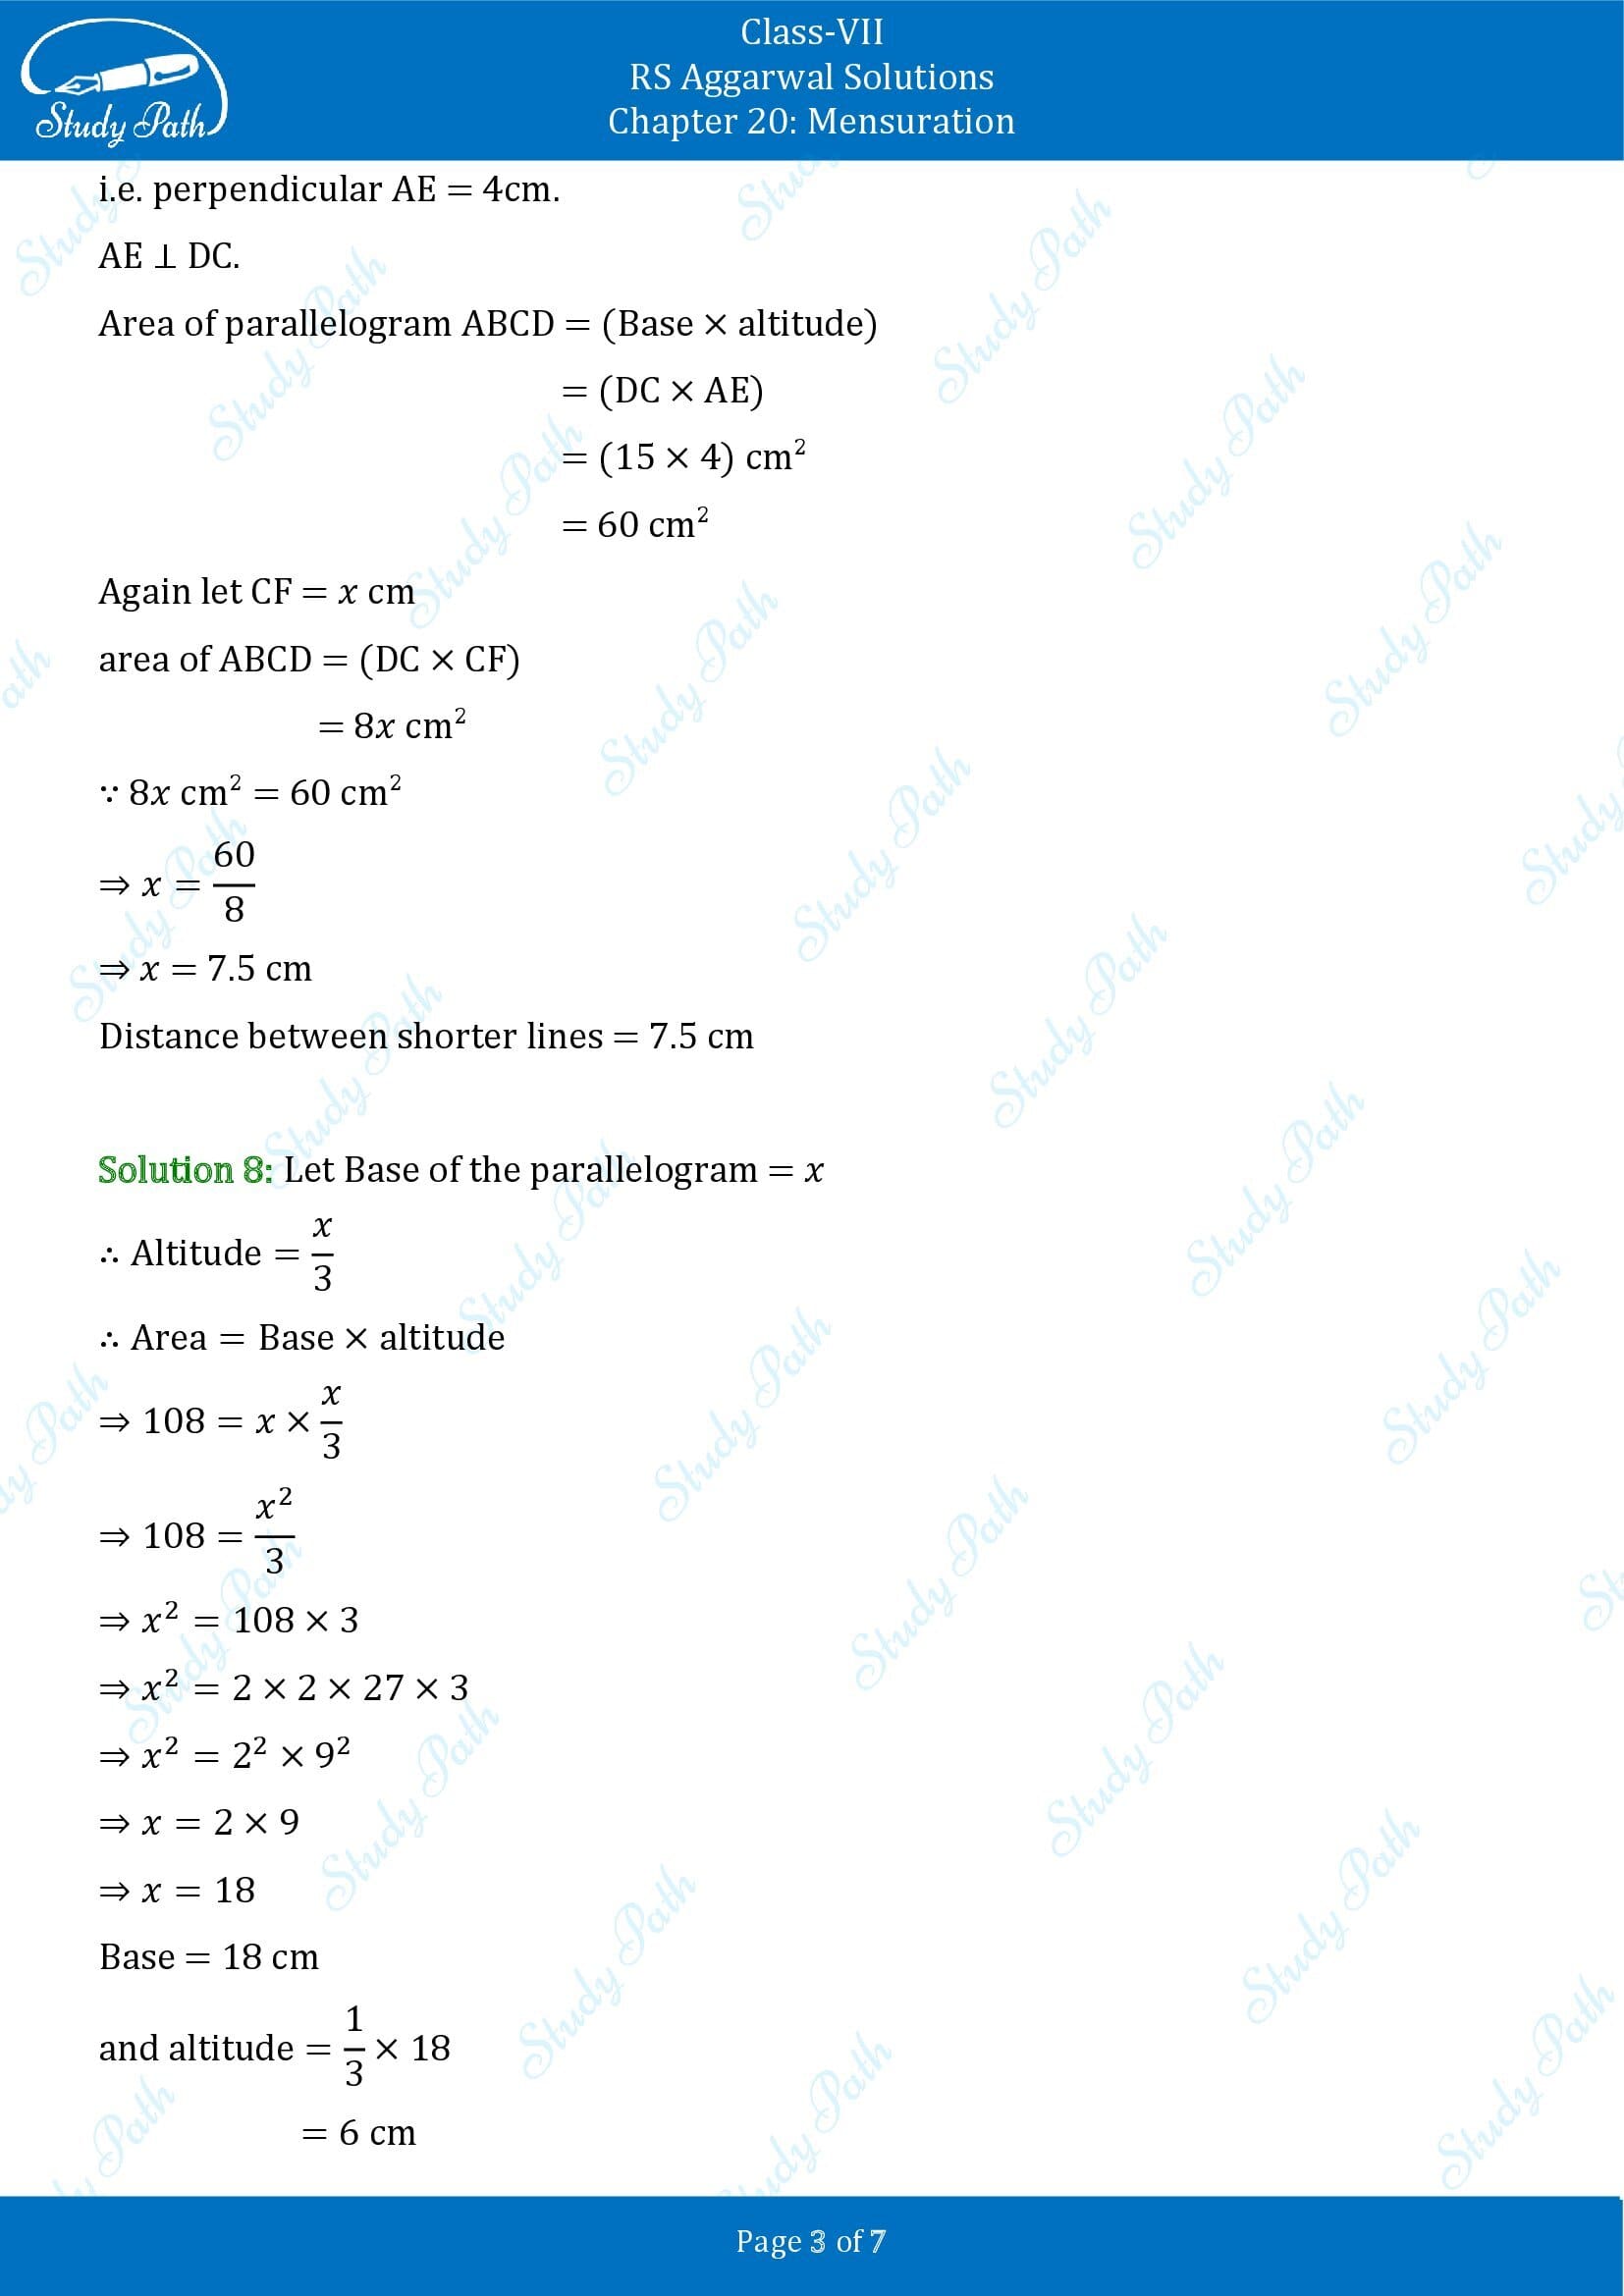 RS Aggarwal Solutions Class 7 Chapter 20 Mensuration Exercise 20C 00003